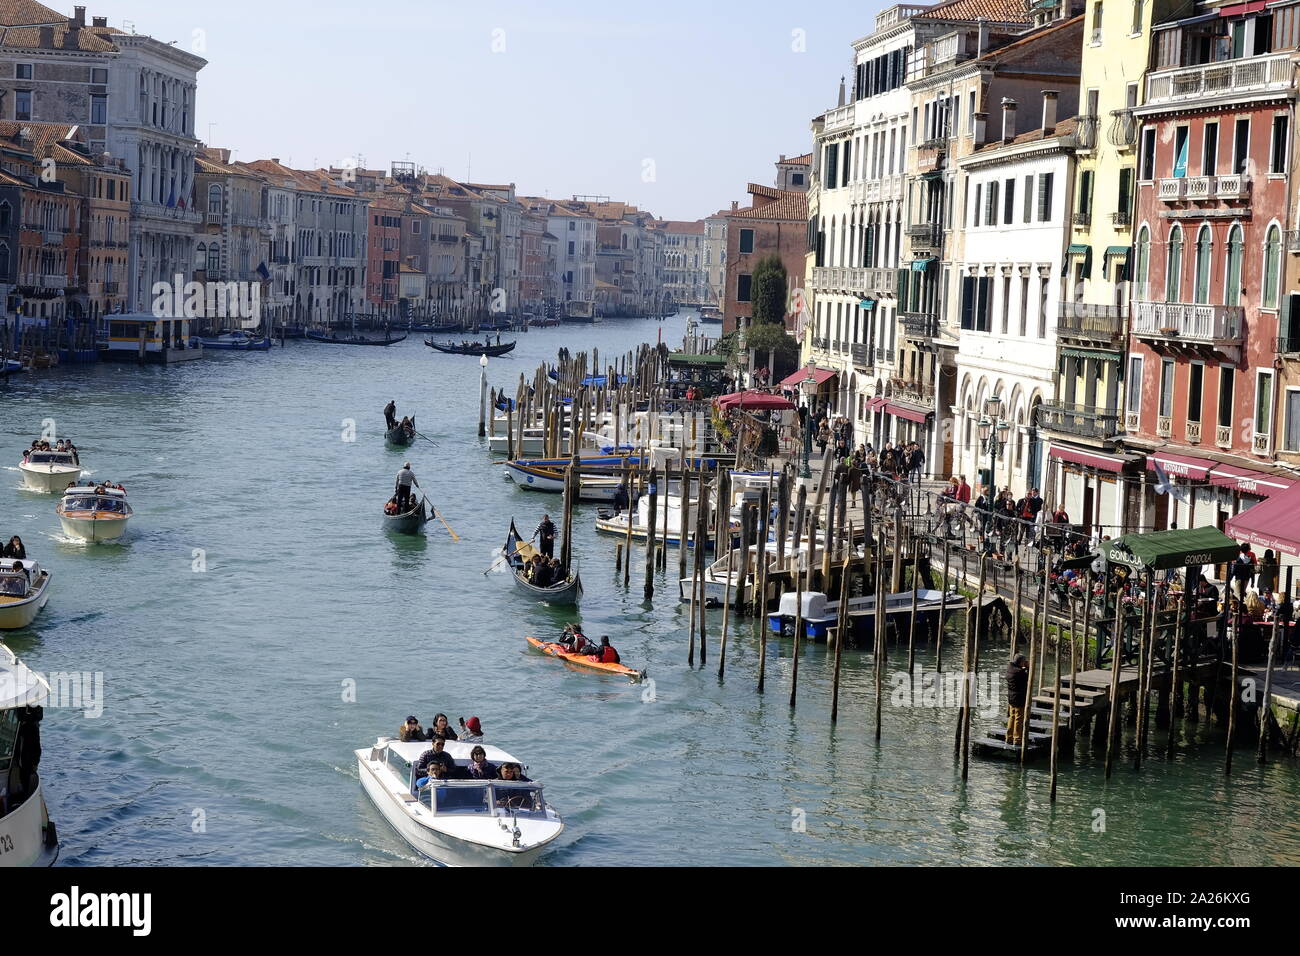 Venice, high view of gran canal with gondola boats and traditional architecture from Rialto bridge Stock Photo